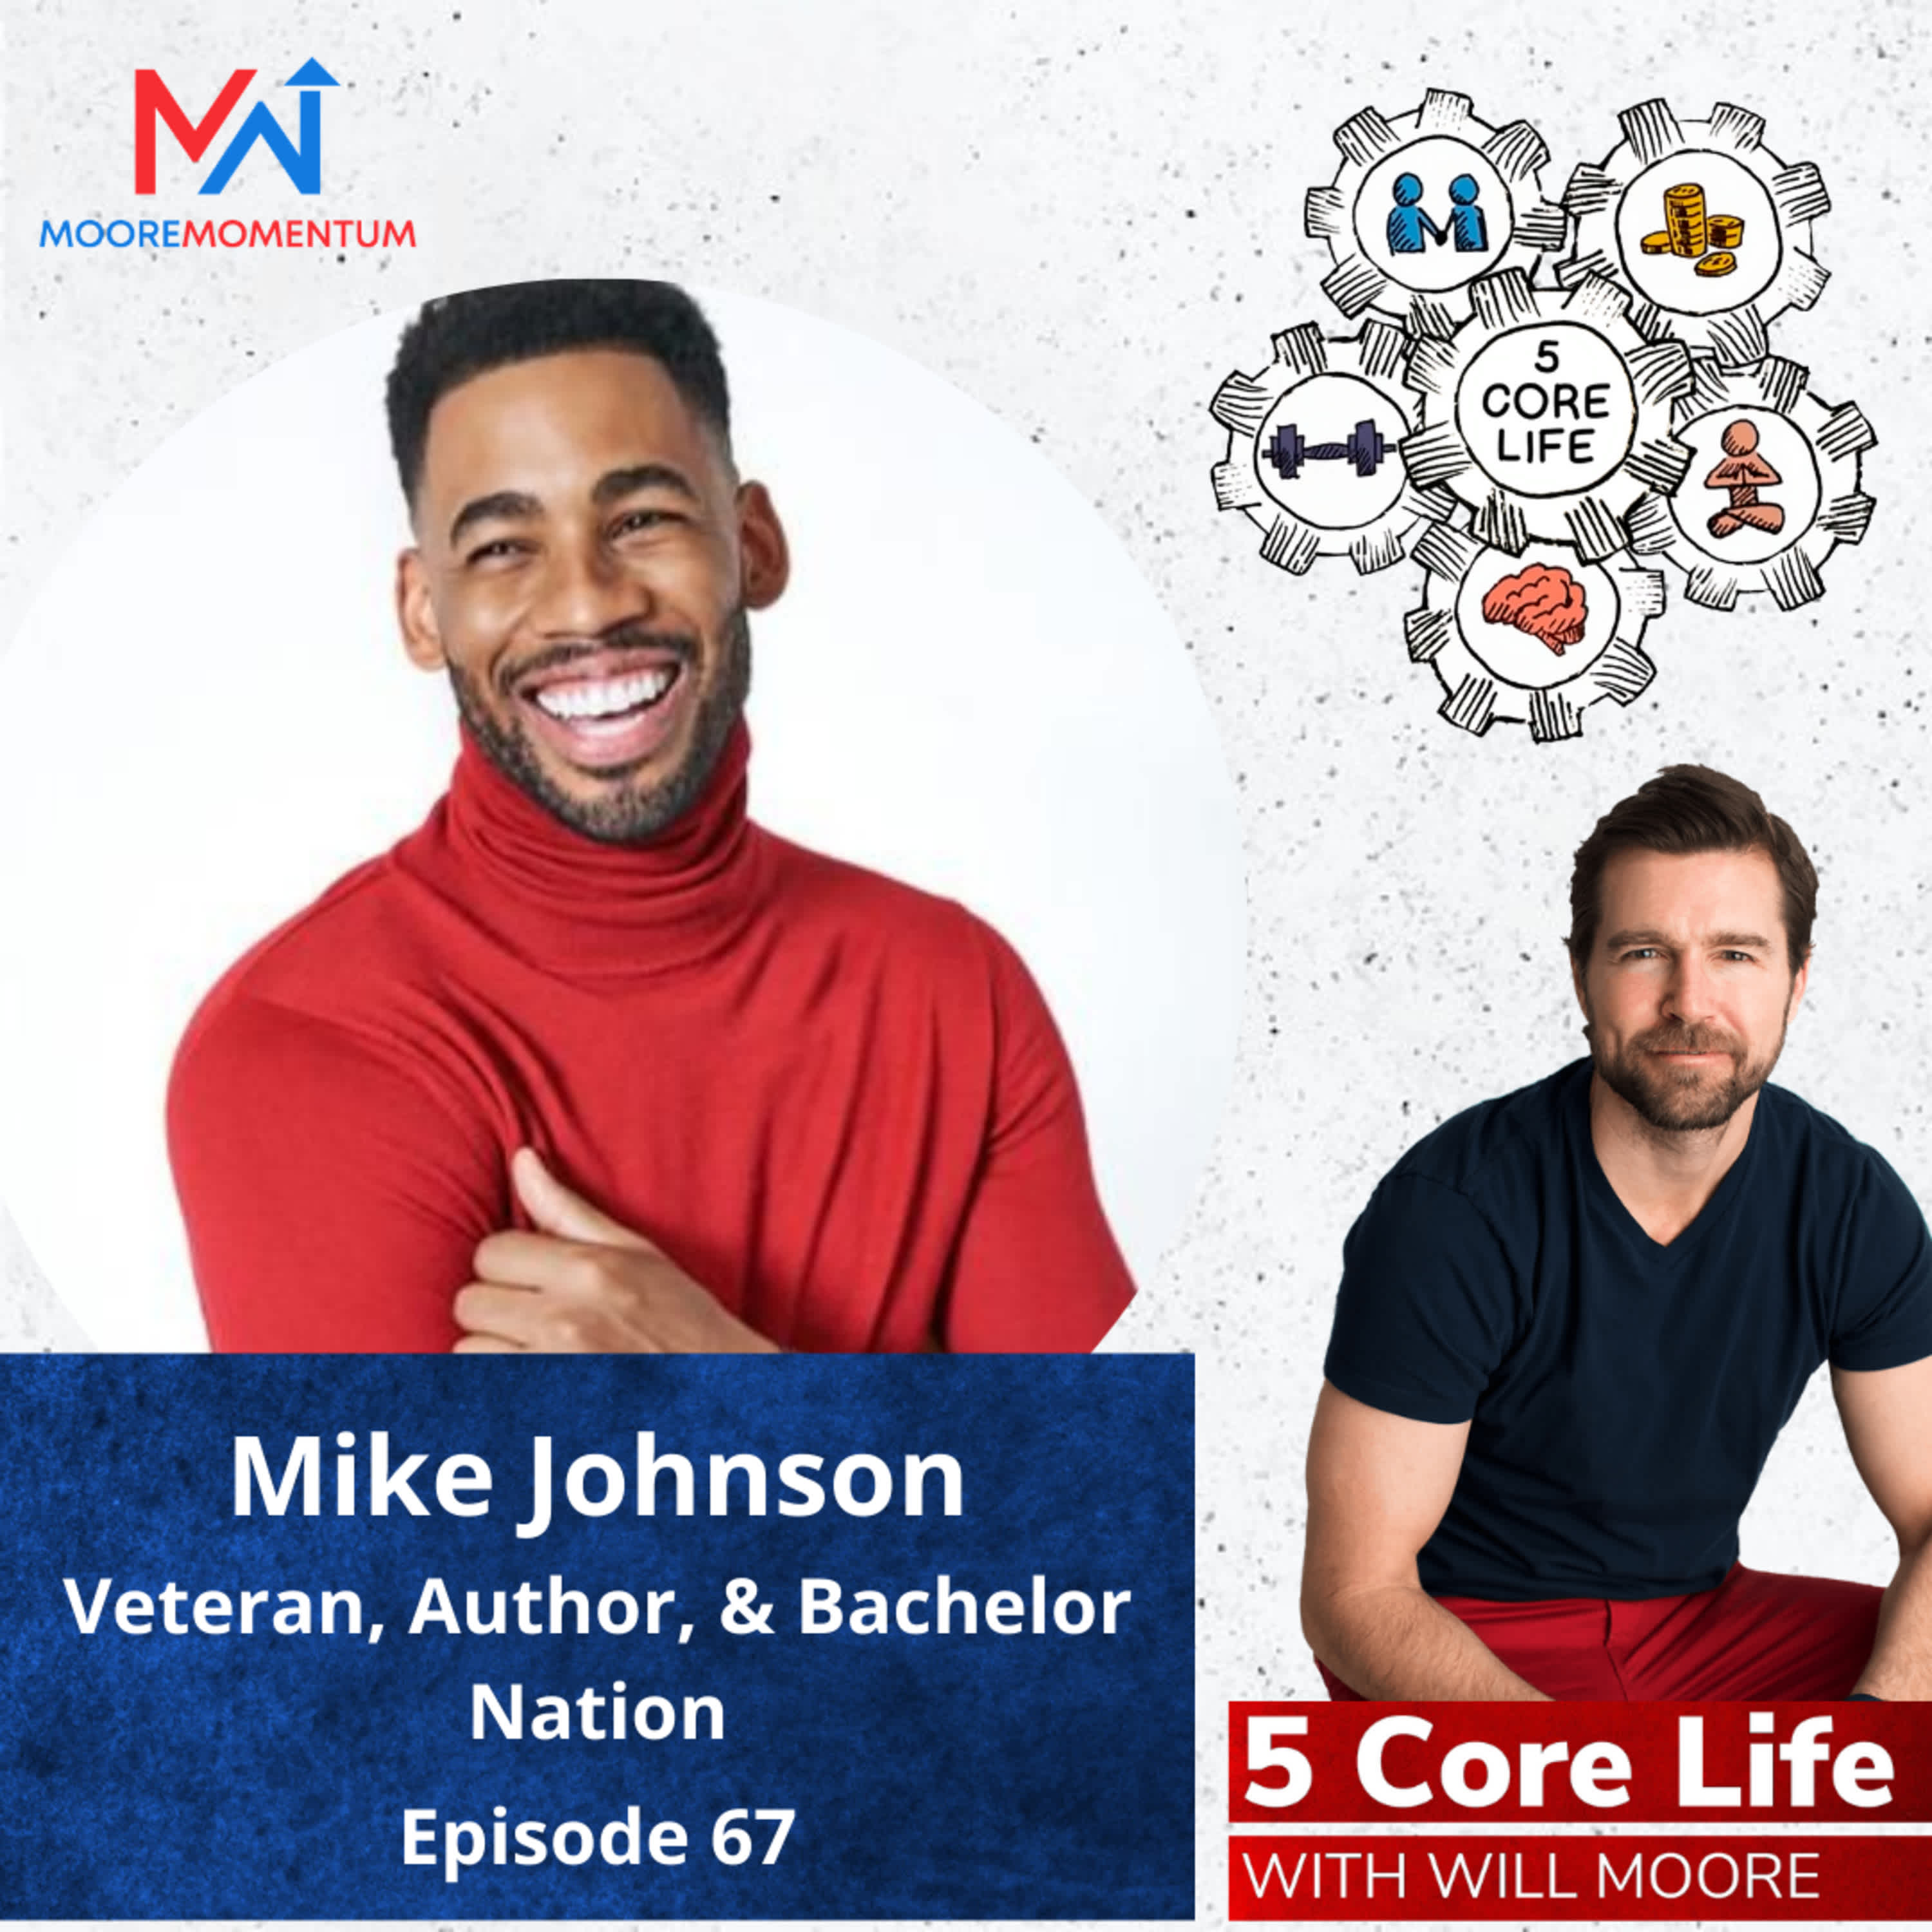 The Power of Mindset and Surviving Reality TV, Mike Johnson, Air Force Vet, Author, & Bachelor Nation